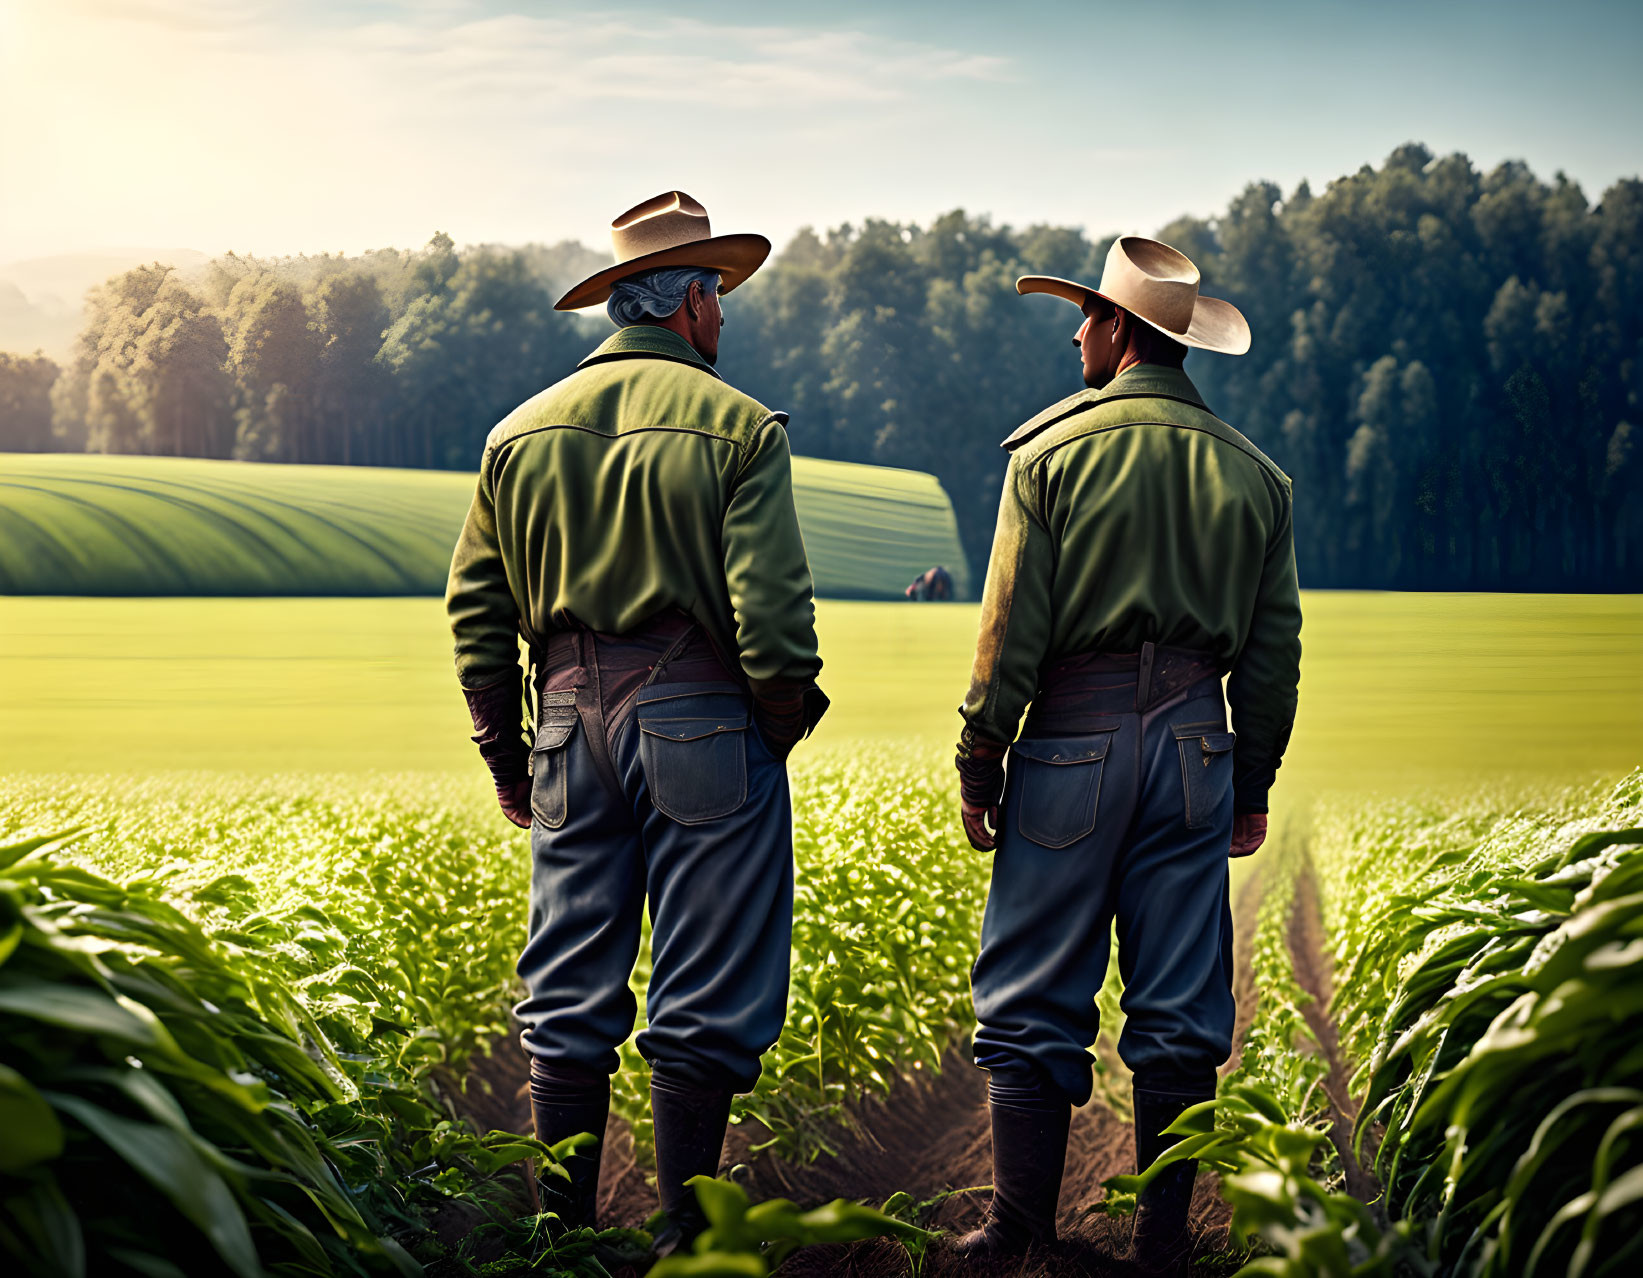 Cowboy-hat-wearing individuals in field with agricultural landscape.